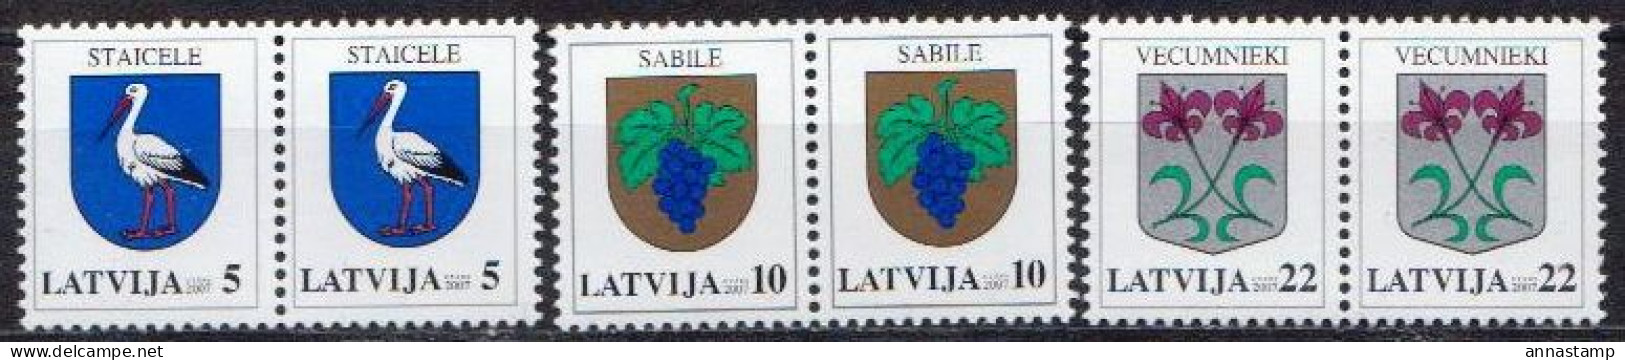 Latvia MNH Set In Pairs - Timbres